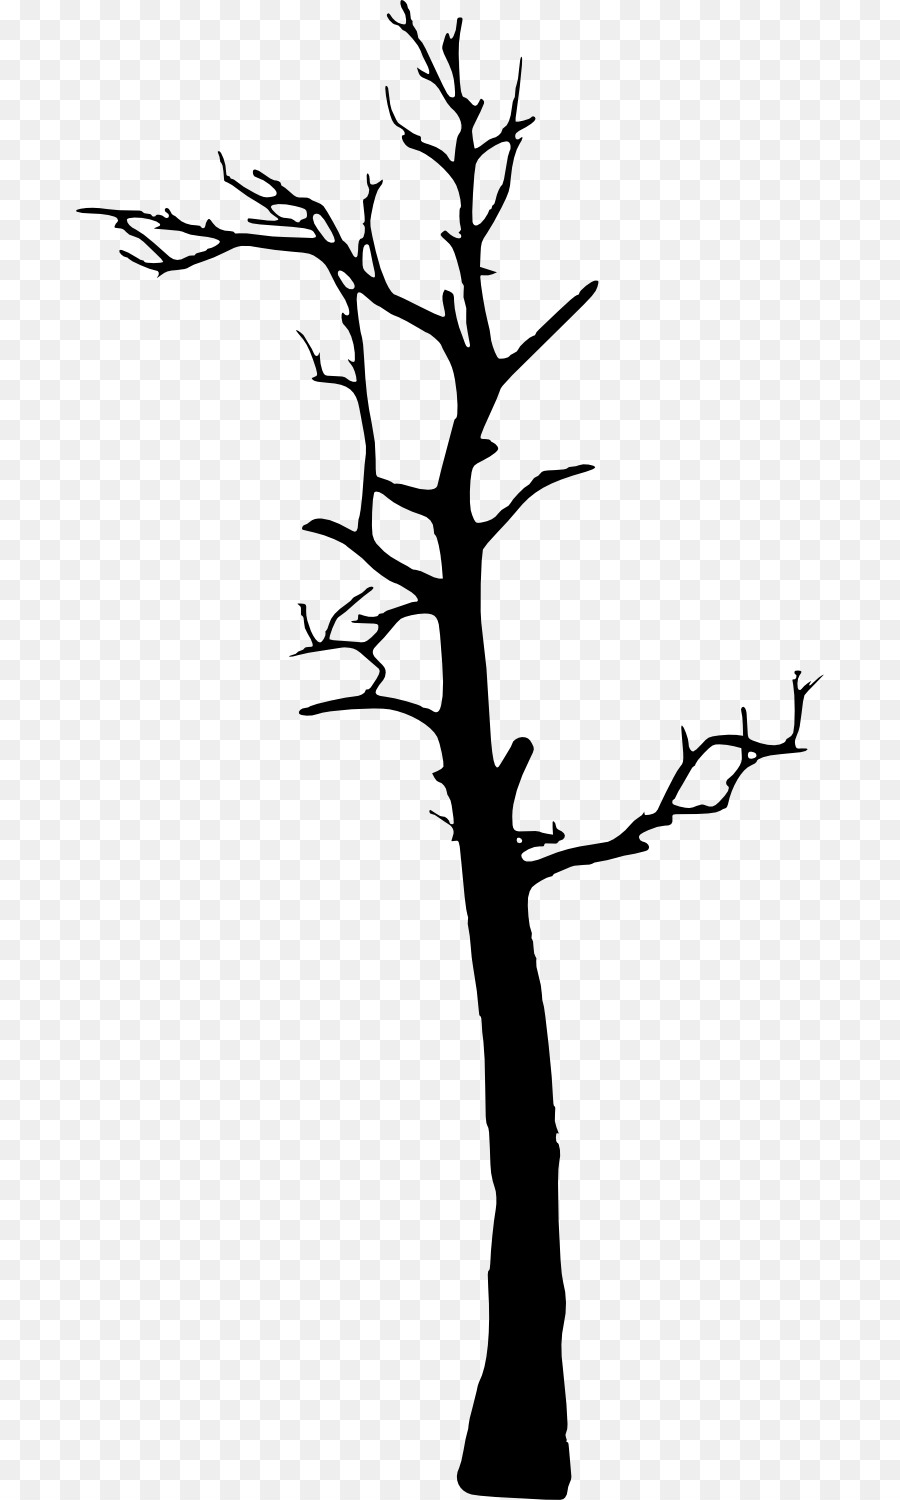 Tree Woody plant Clip art - dead tree png download - 748*1500 - Free Transparent Tree png Download.